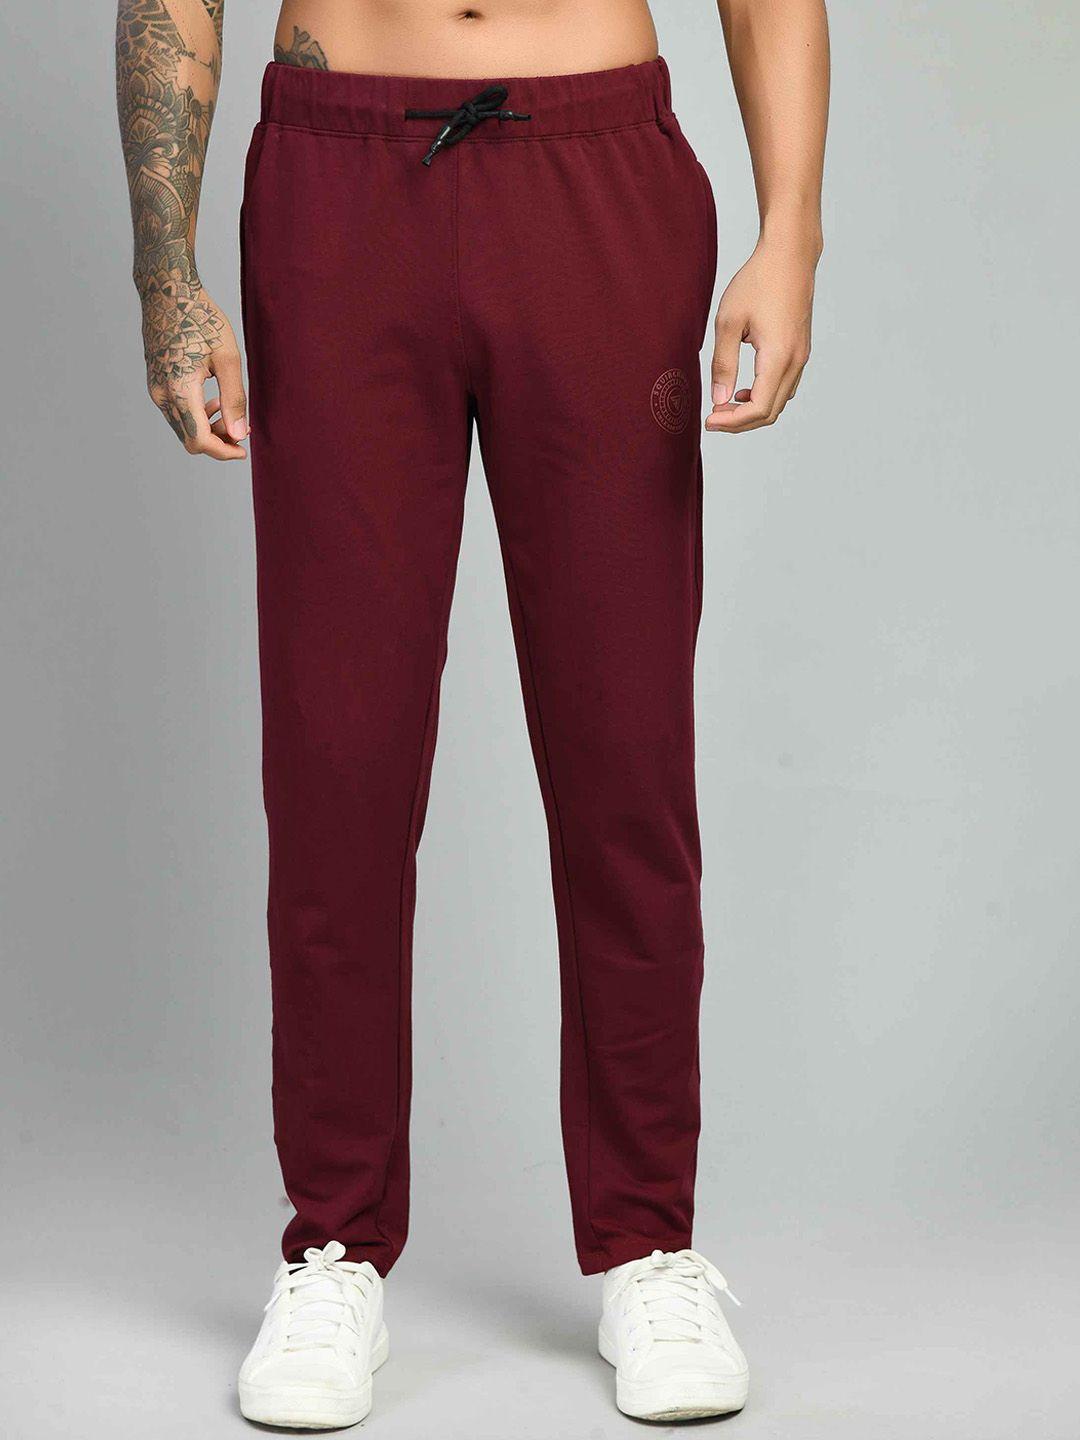 squirehood men mid-rise cotton twill track pant